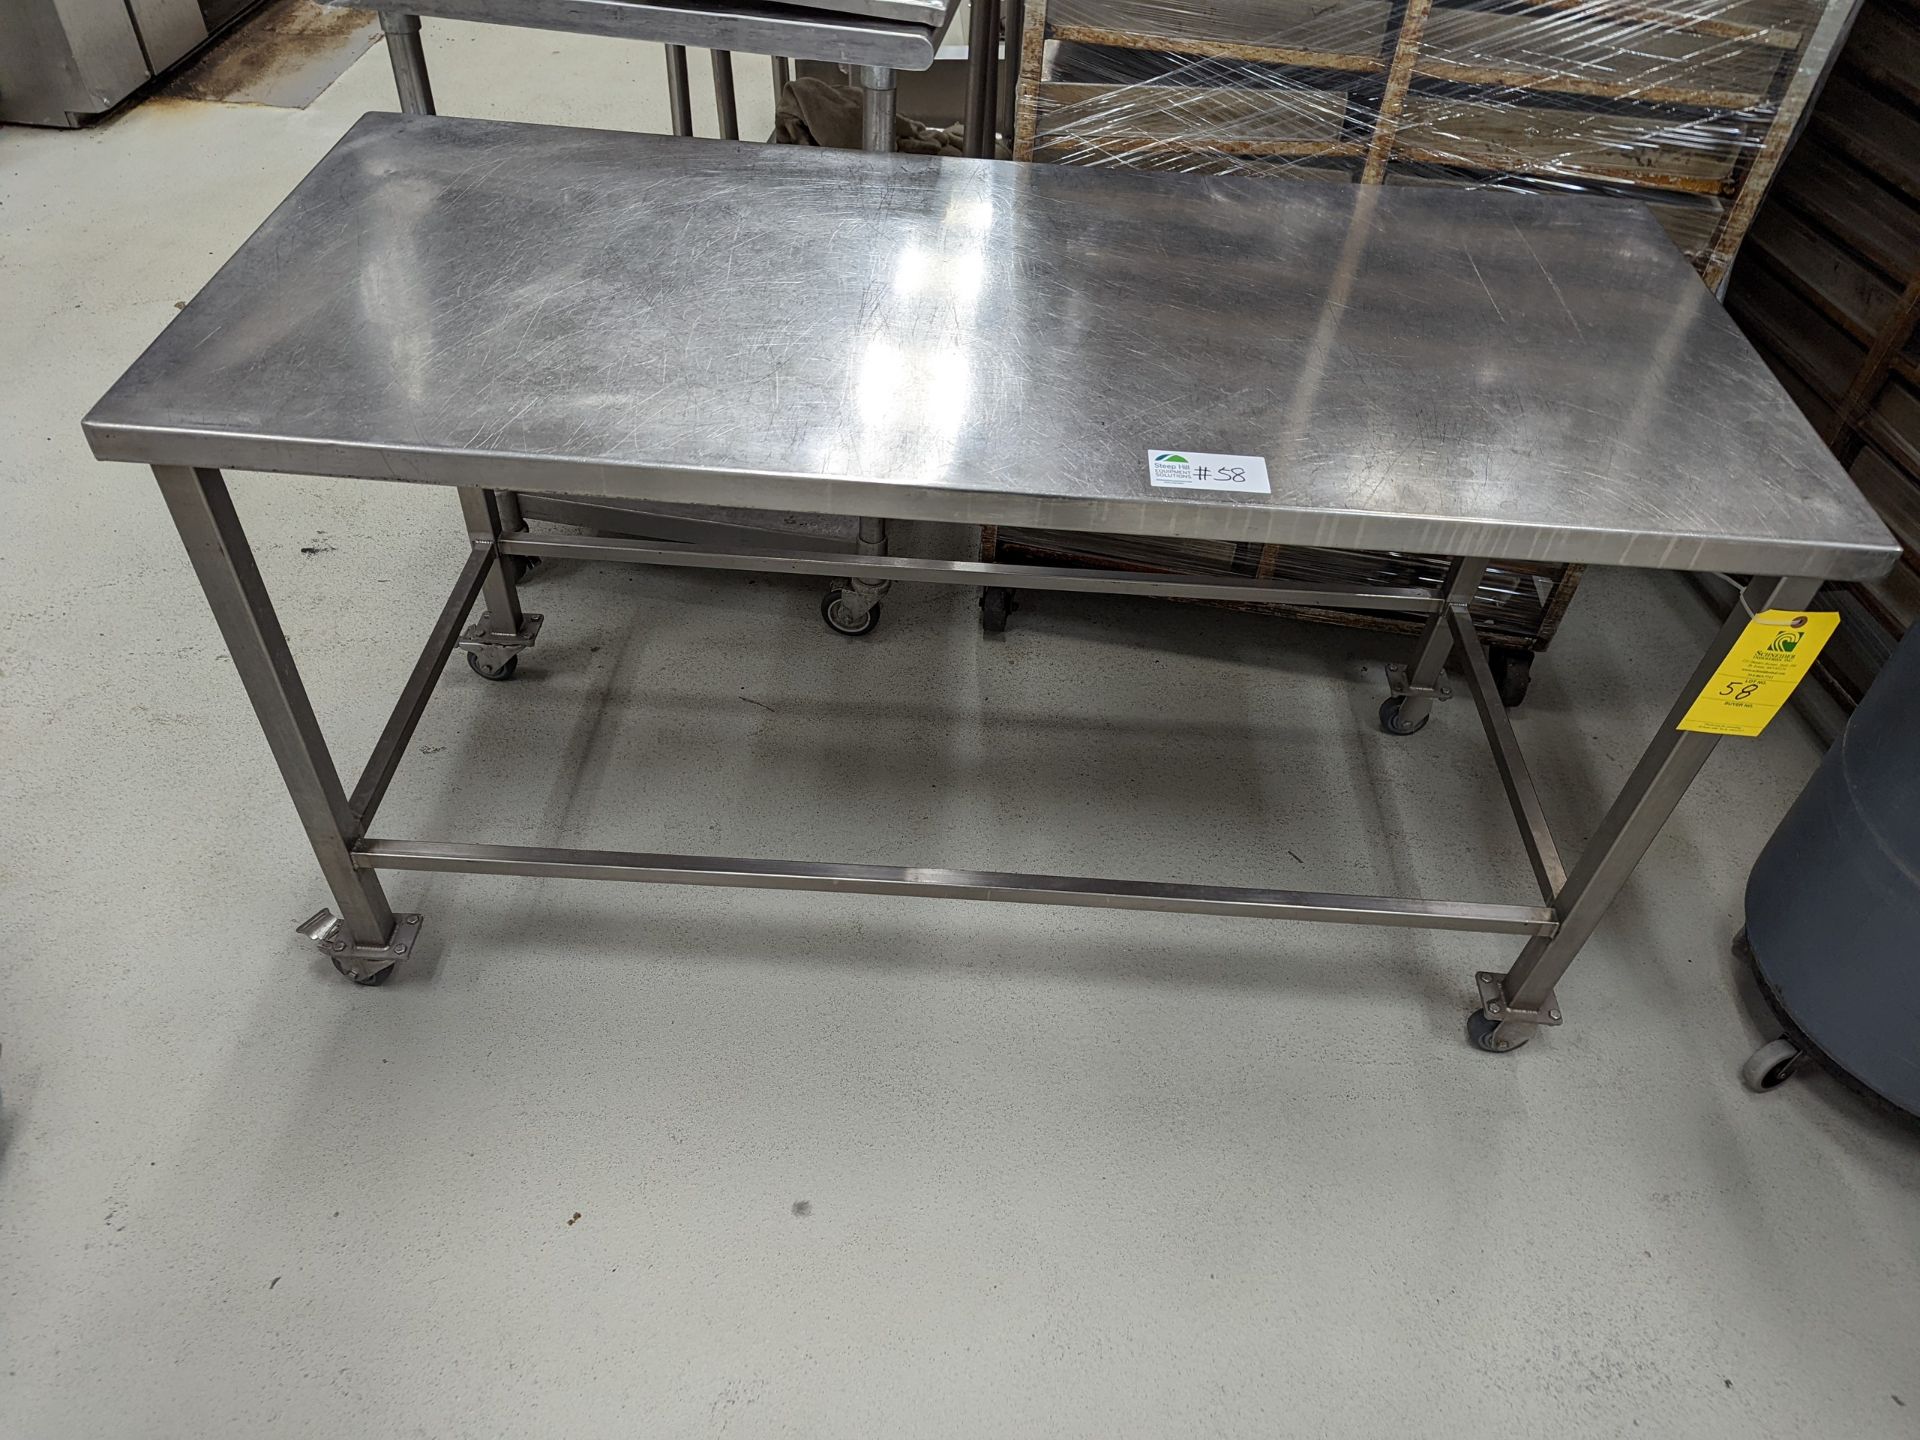 Stainless Table on castor wheels, 60Lx27Wx34H